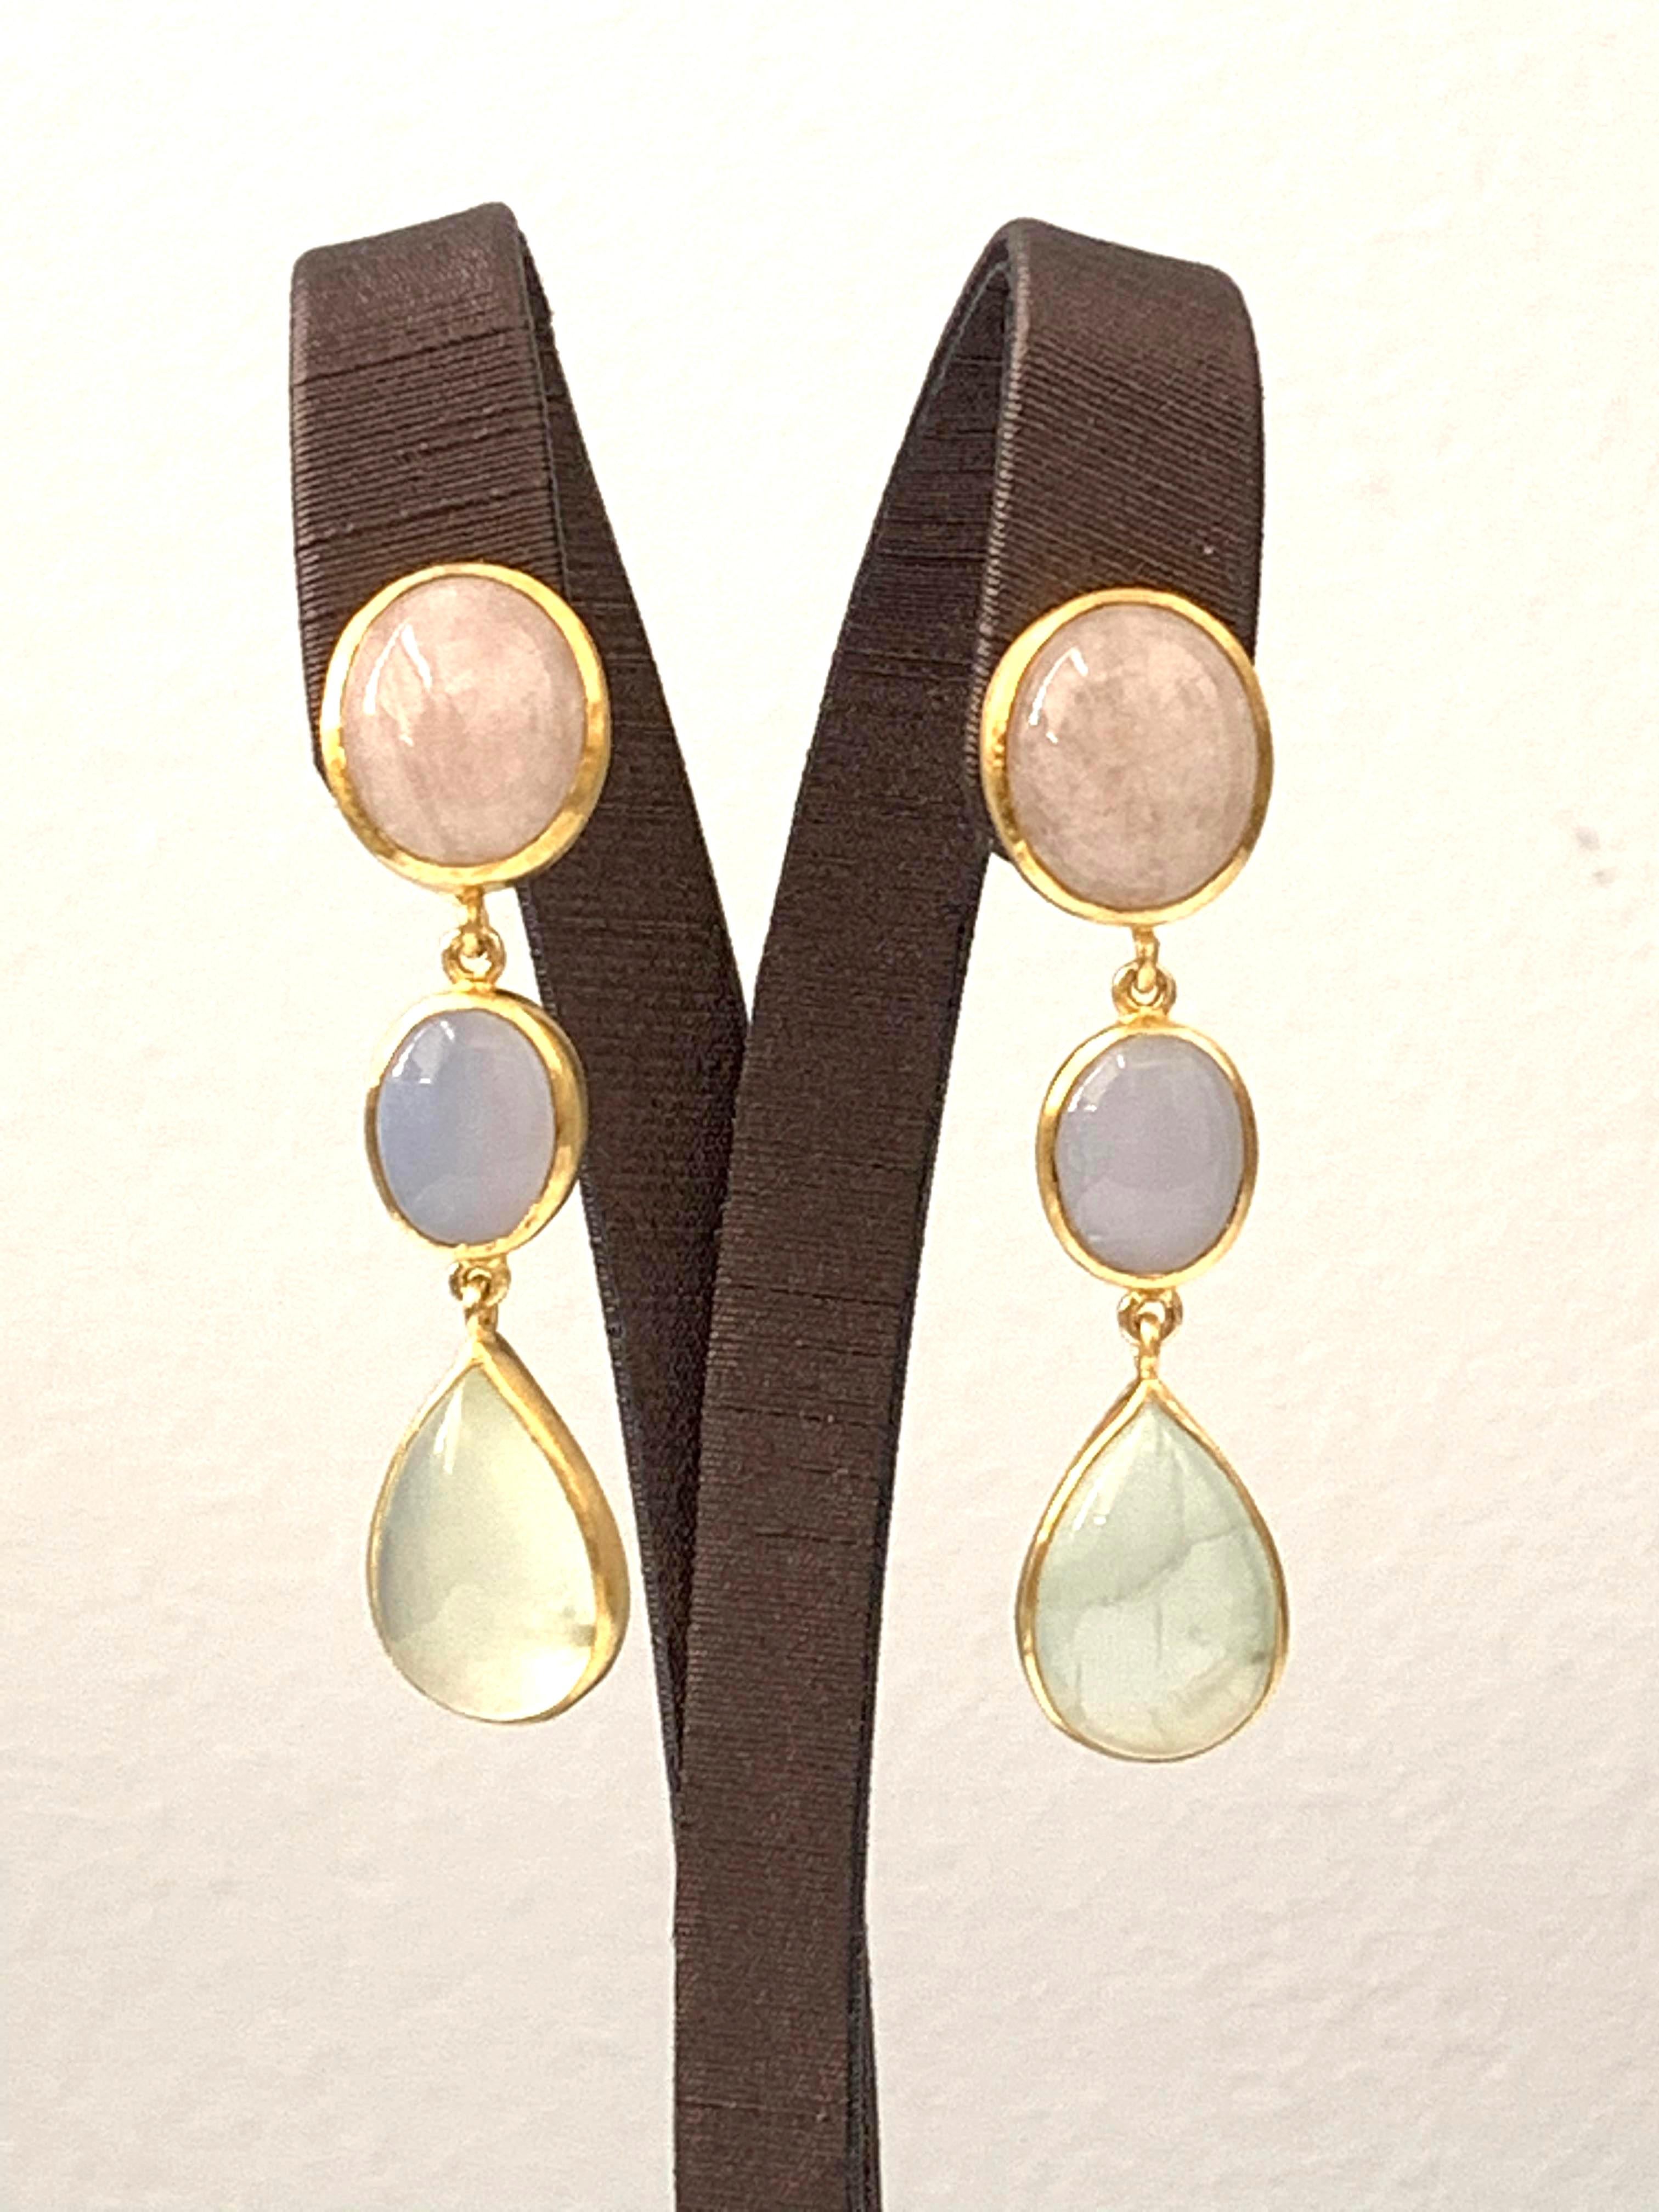 Discover this Oval Morganite, Oval Chalcedony and Pear Prehnite Vermeil Dangle Earrings. All in Cabochon cut. Hand set in 18k gold plated sterling silver. Straight post with large earrings back for comfort and safety. 2